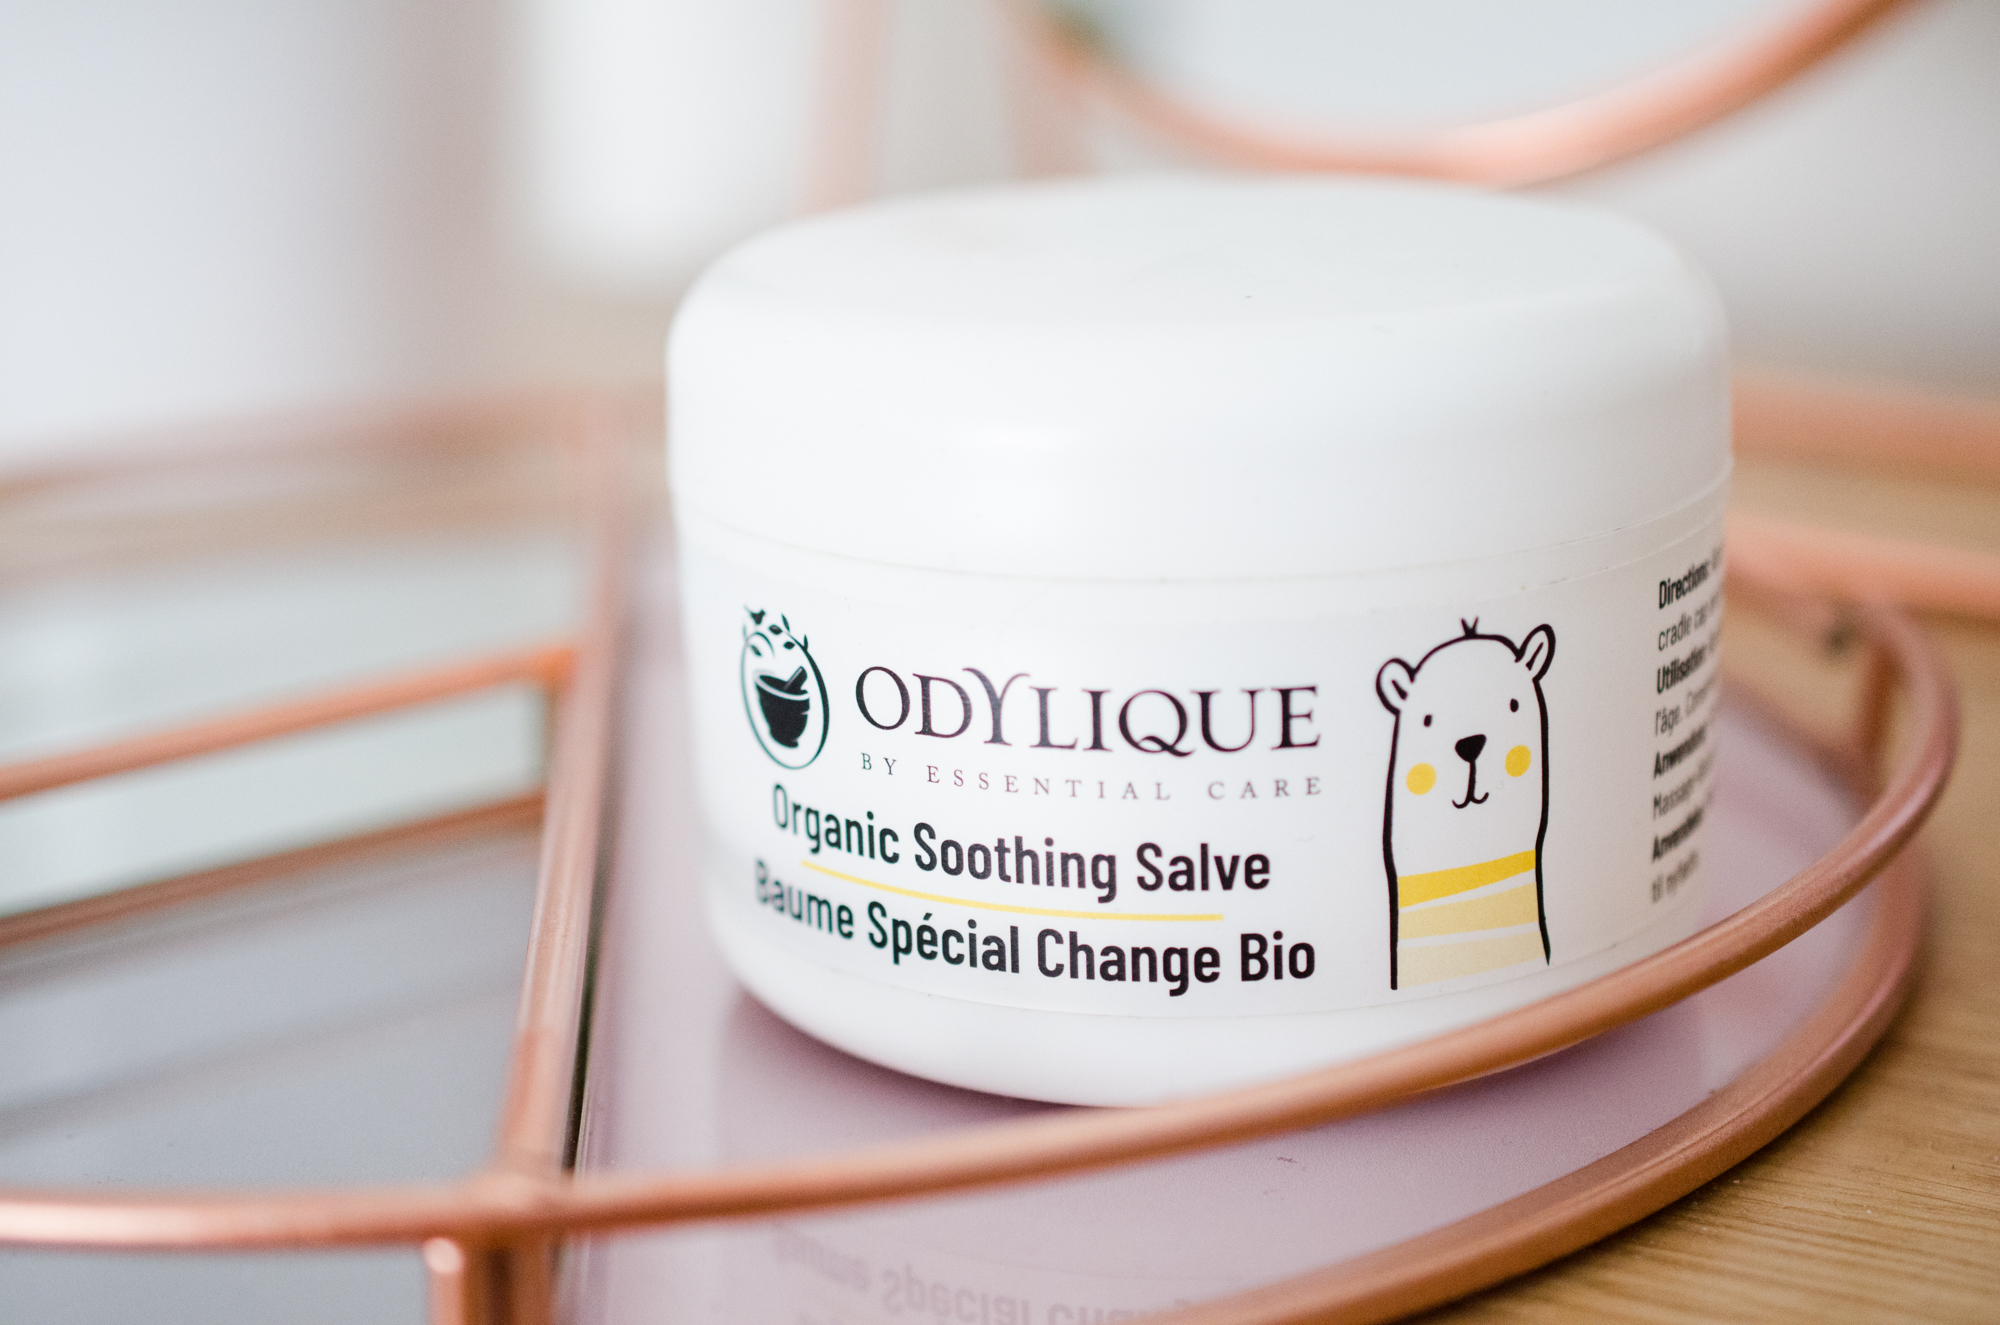 Odylique Organic Soothing Salve